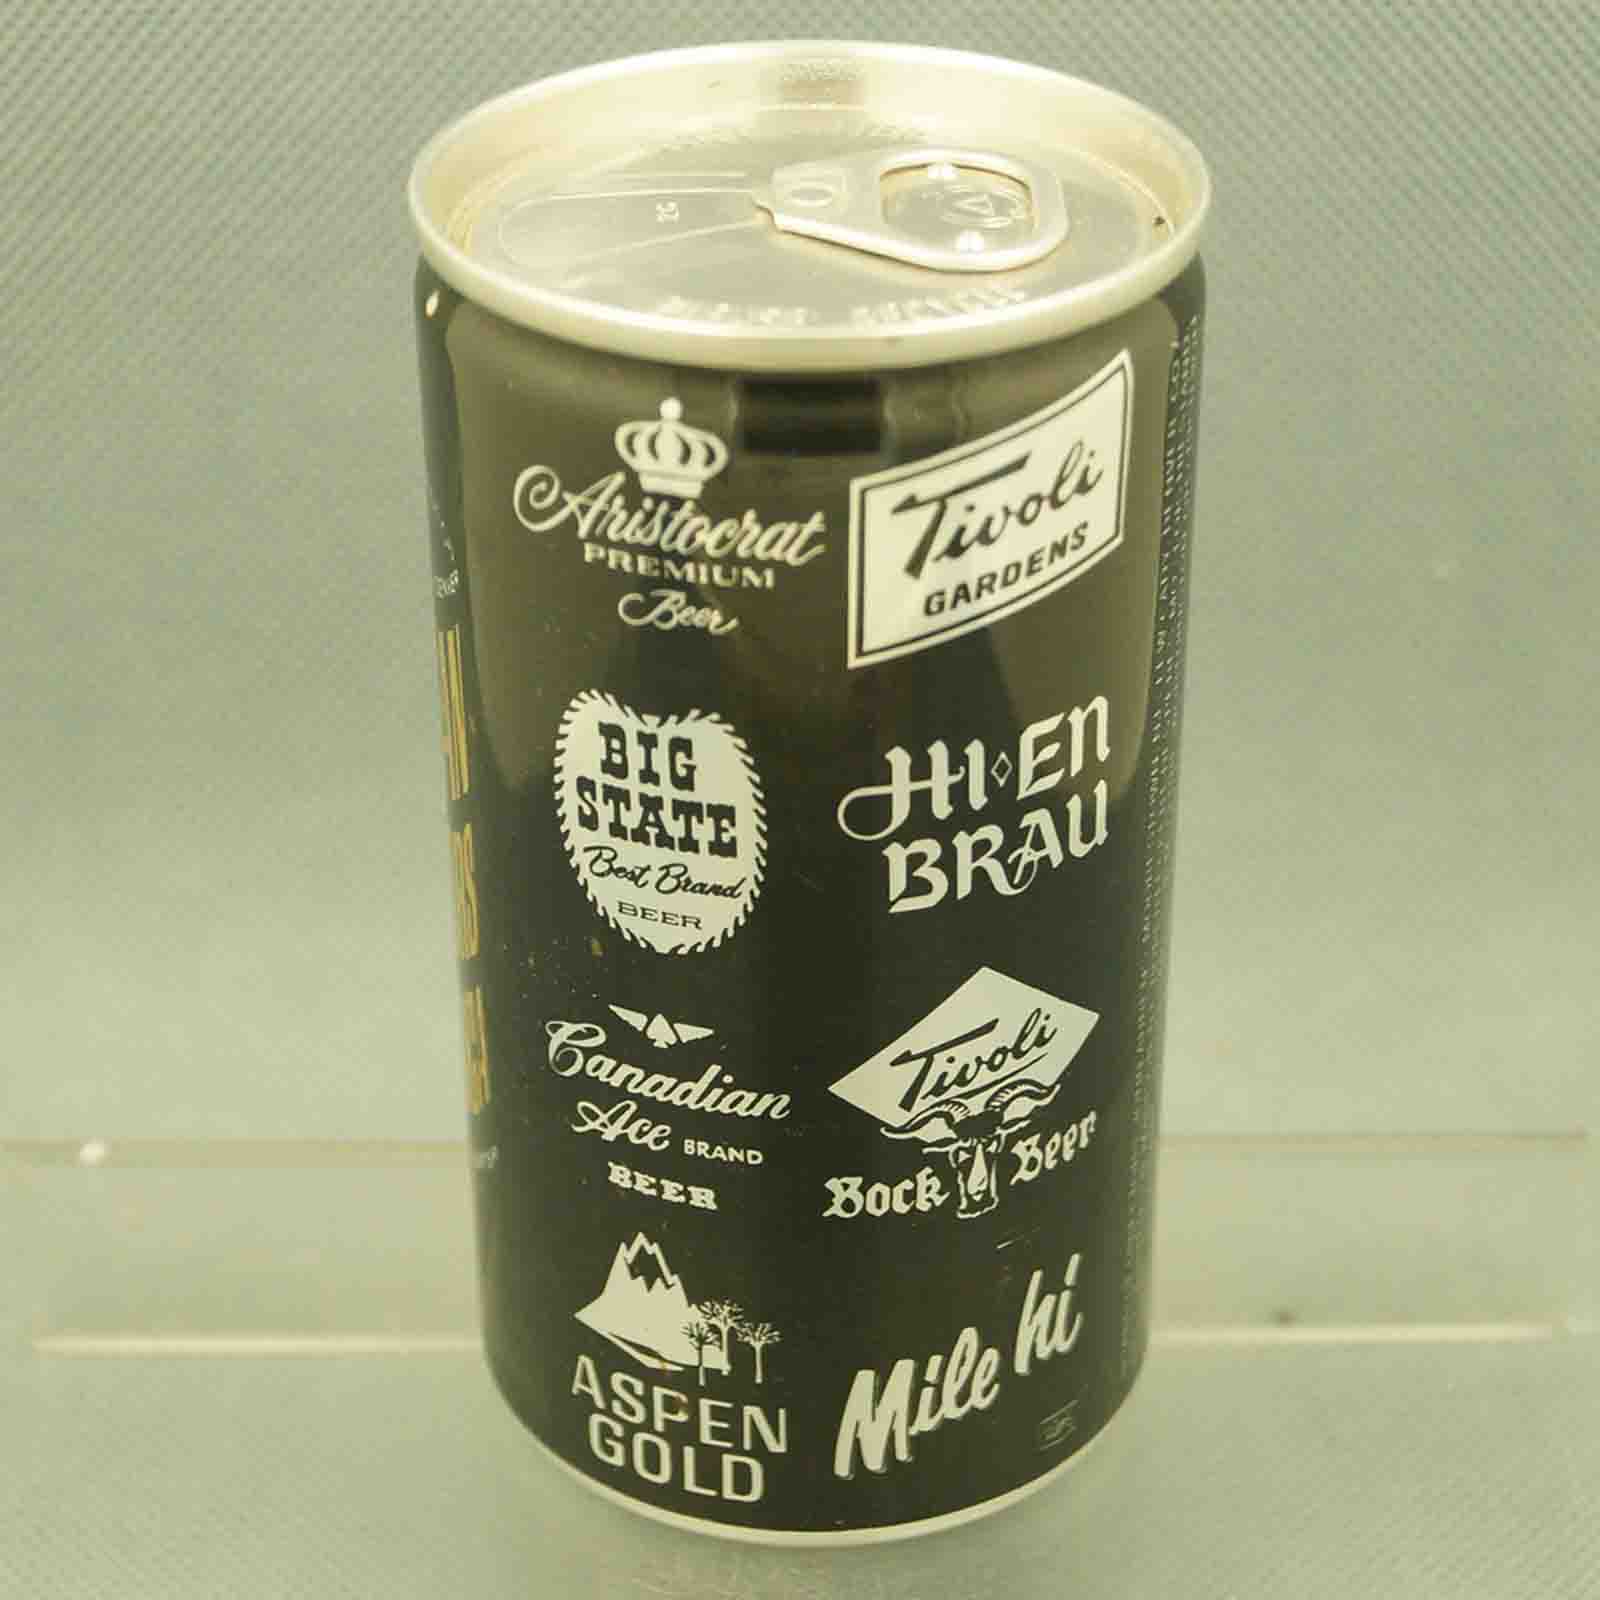 BCCA 207-33 pull tab beer can 2